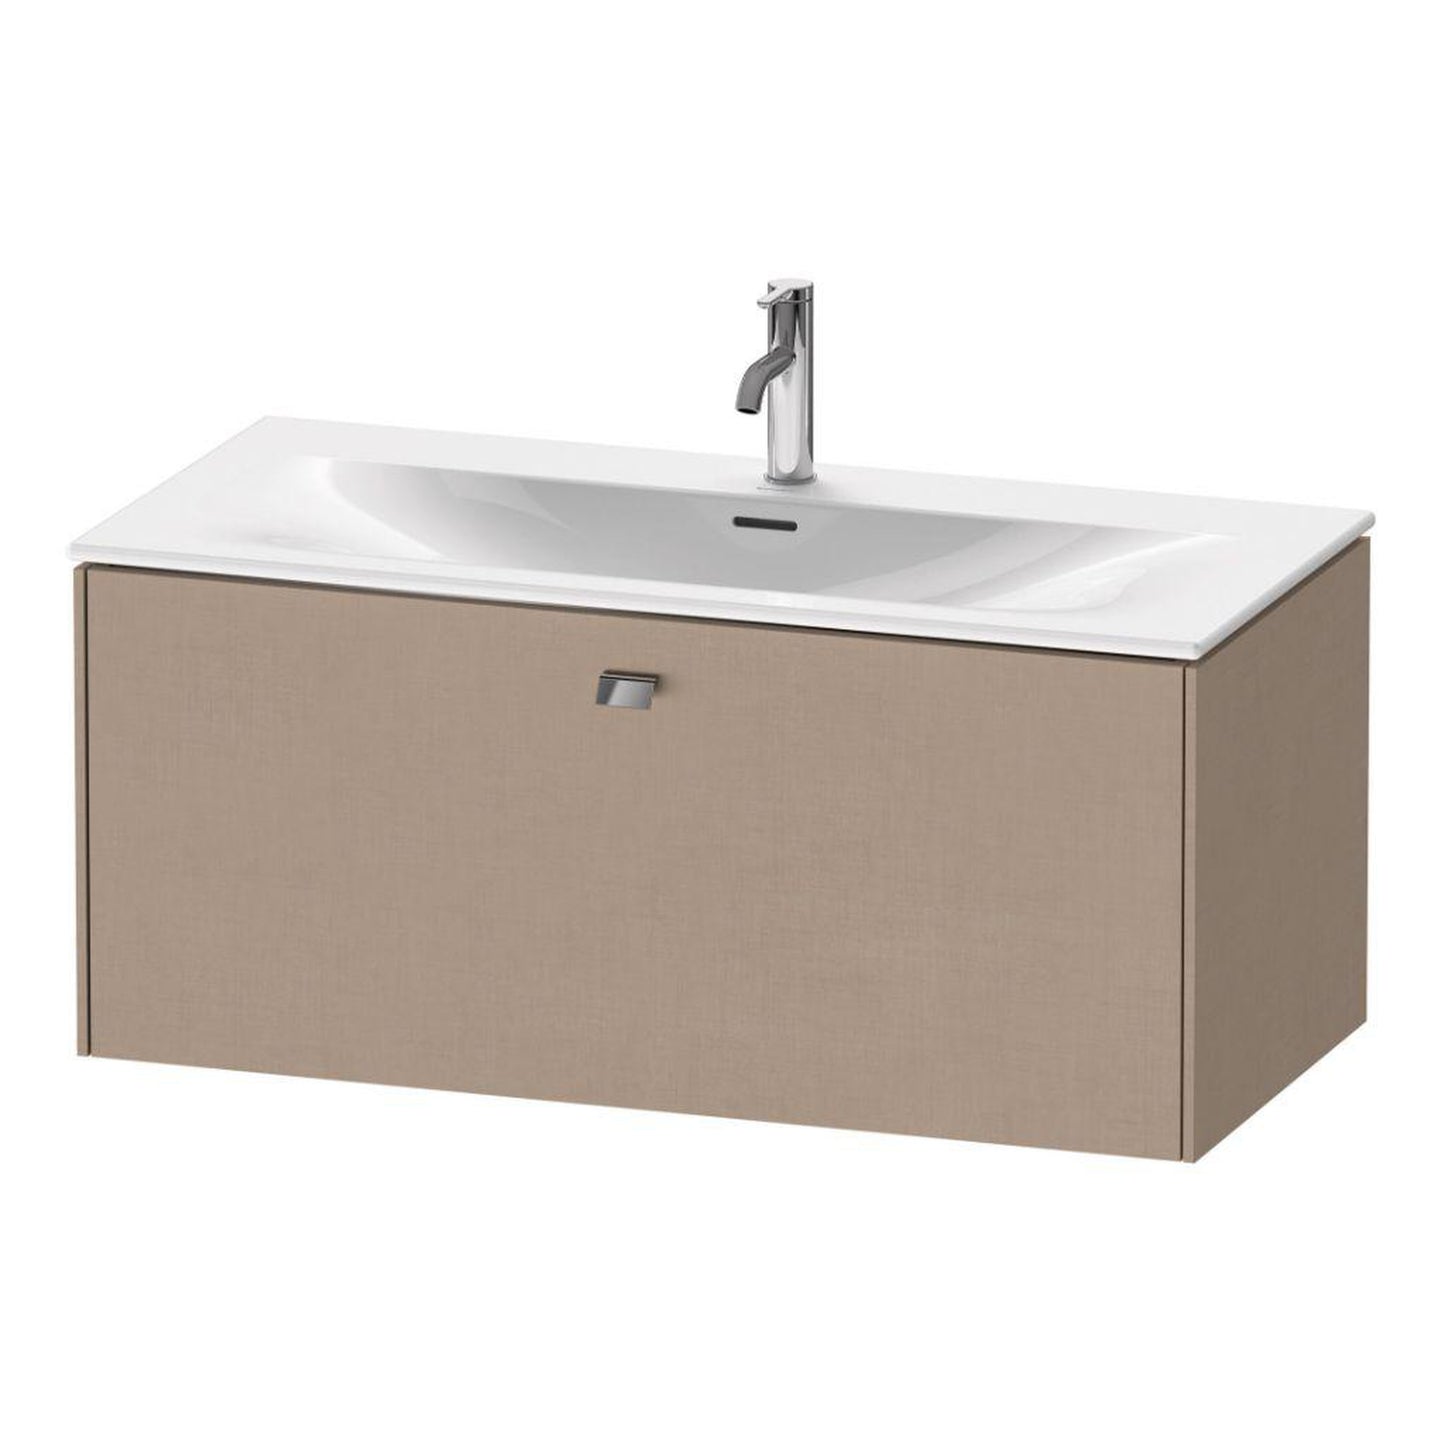 Duravit Brioso BR42130 40" x 17" x 19" One Drawer Wall-Mount Vanity Unit in Linen and Chrome Handle